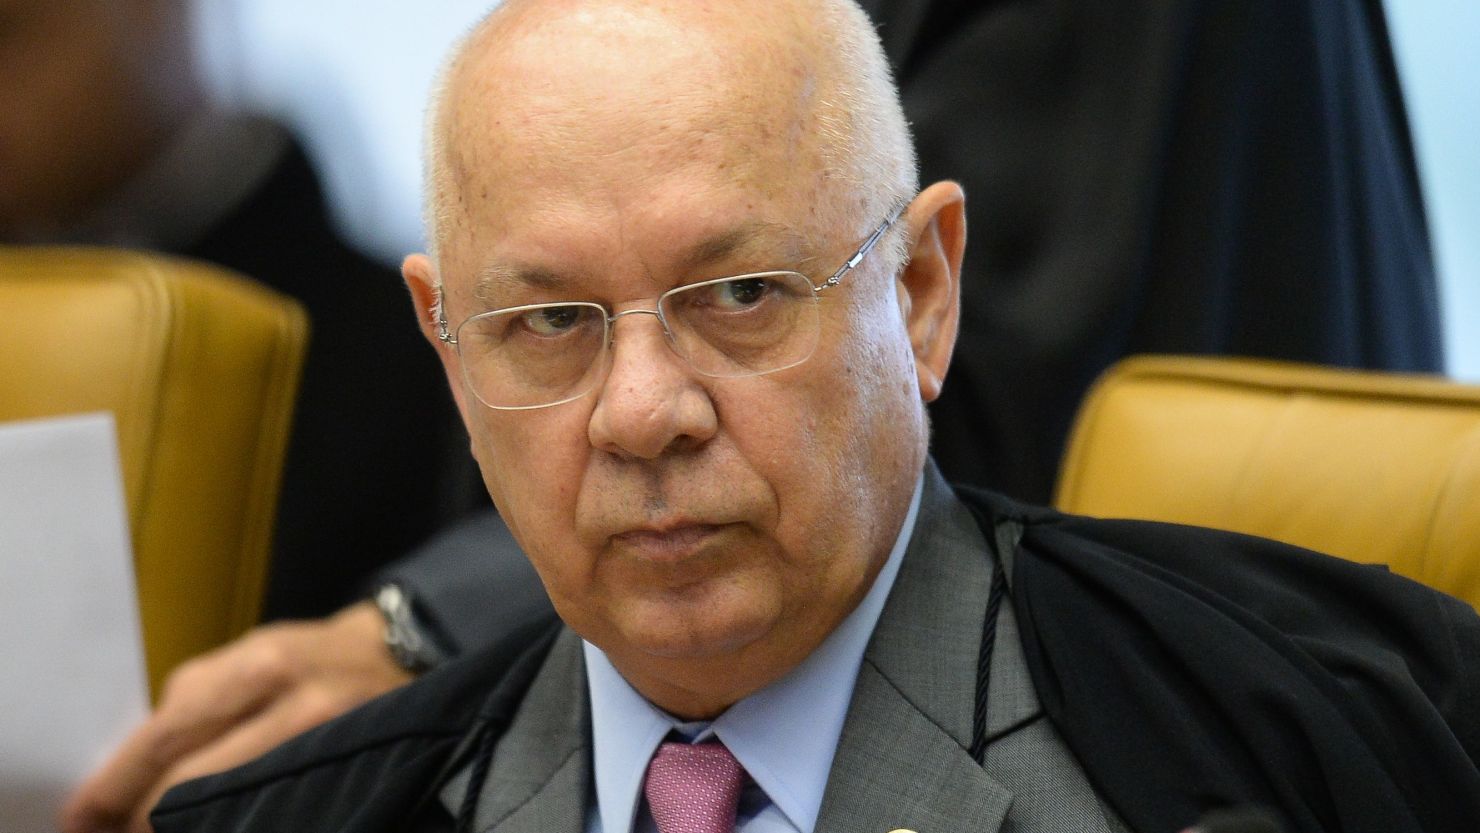 Brazilian Supreme Court Justice Teori Zavascki listens during a March 31, 2016, session of the court in Brasilia. Zavascki's body was recovered Thursday from the wreckage of a plane crash.